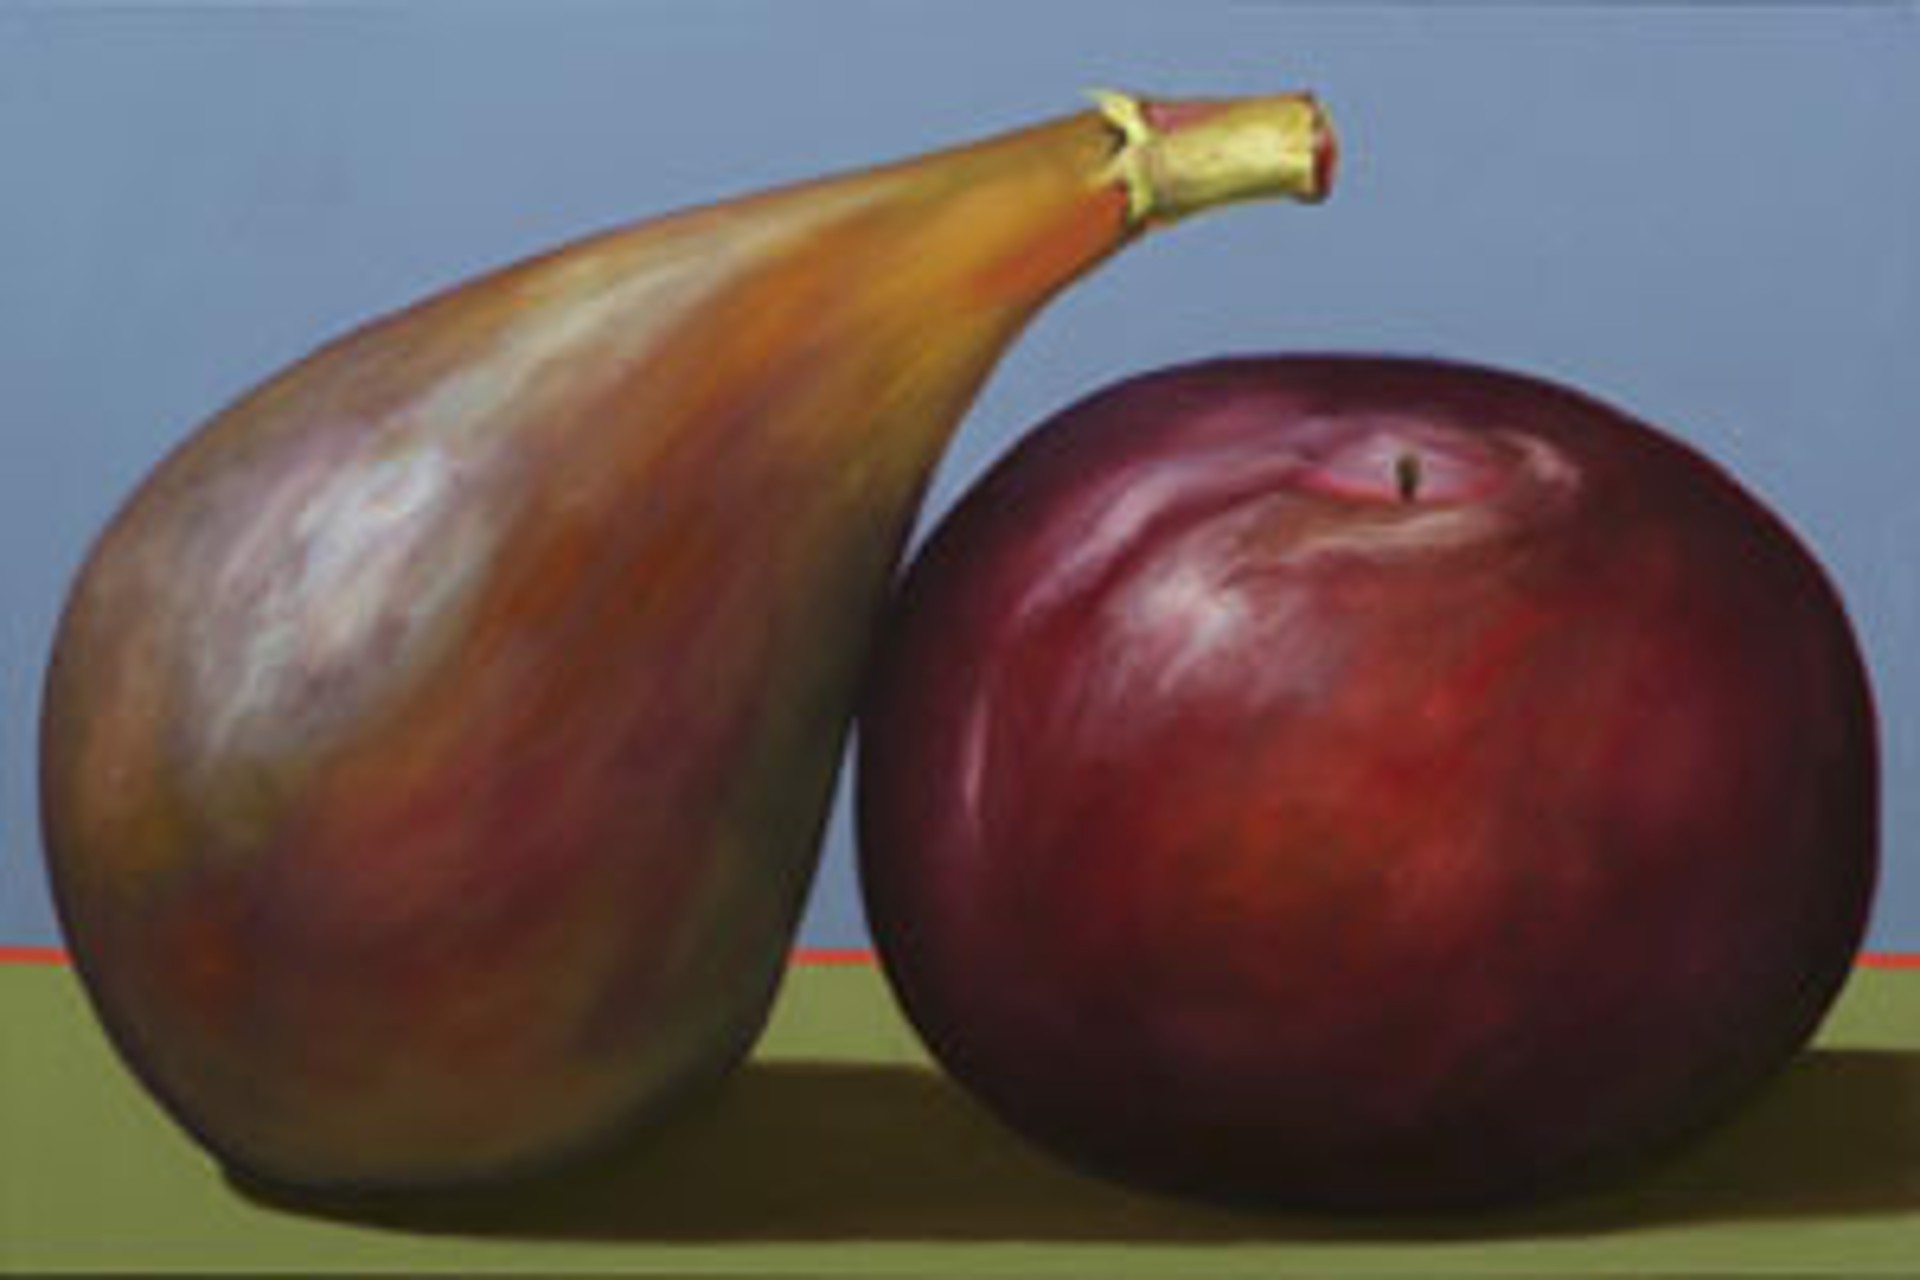 Plum and Fig by Bill Chisholm